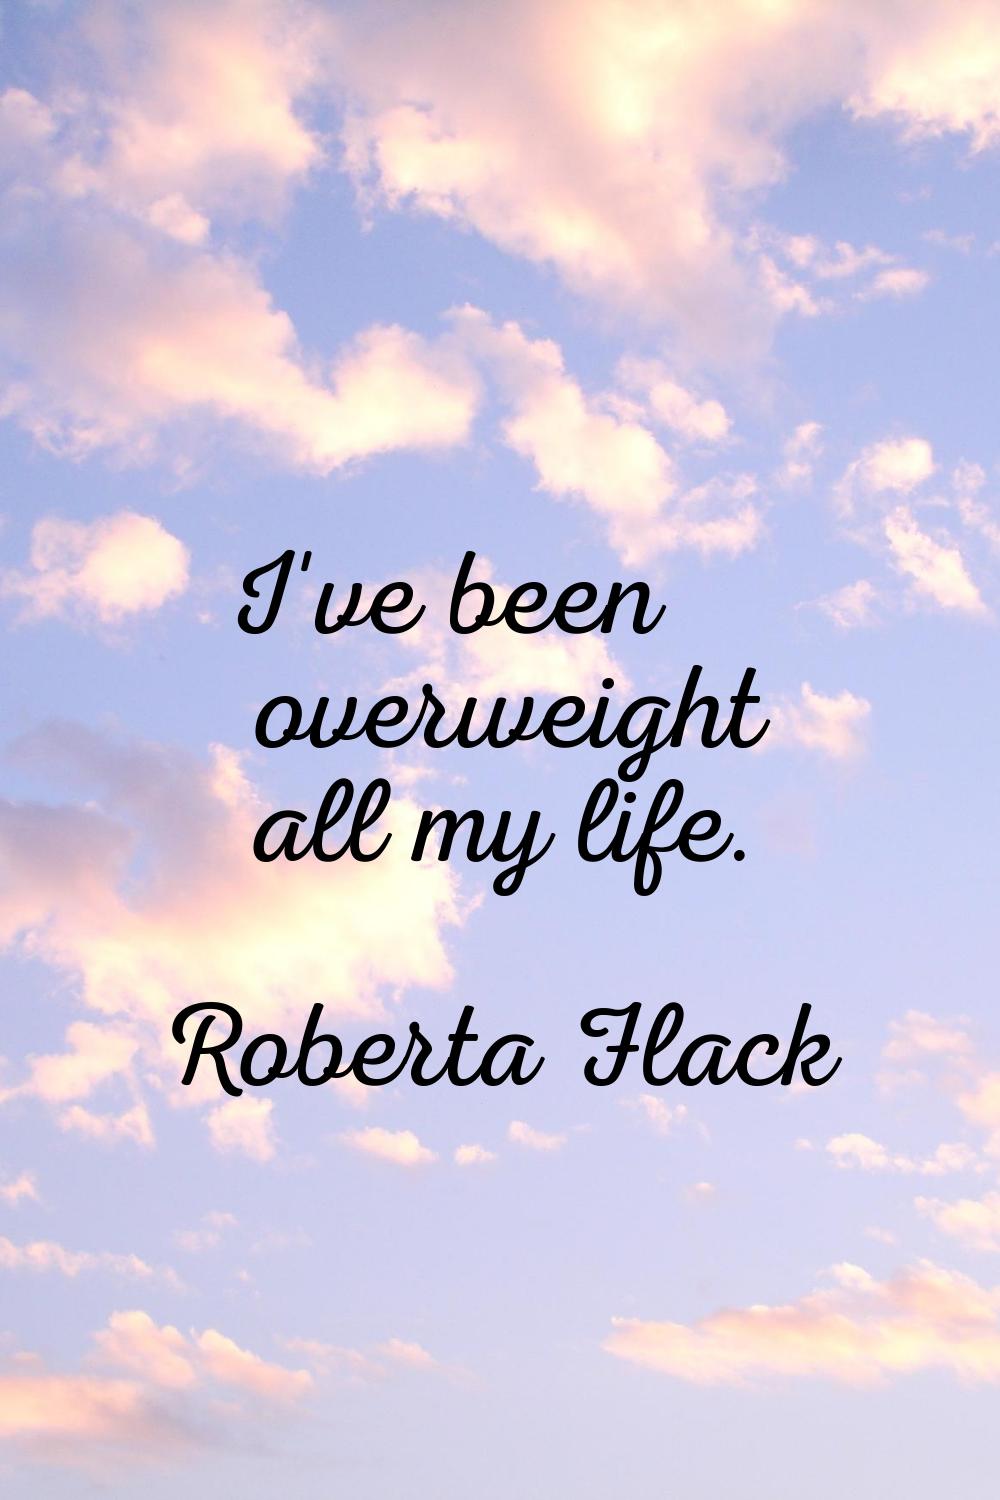 I've been overweight all my life.